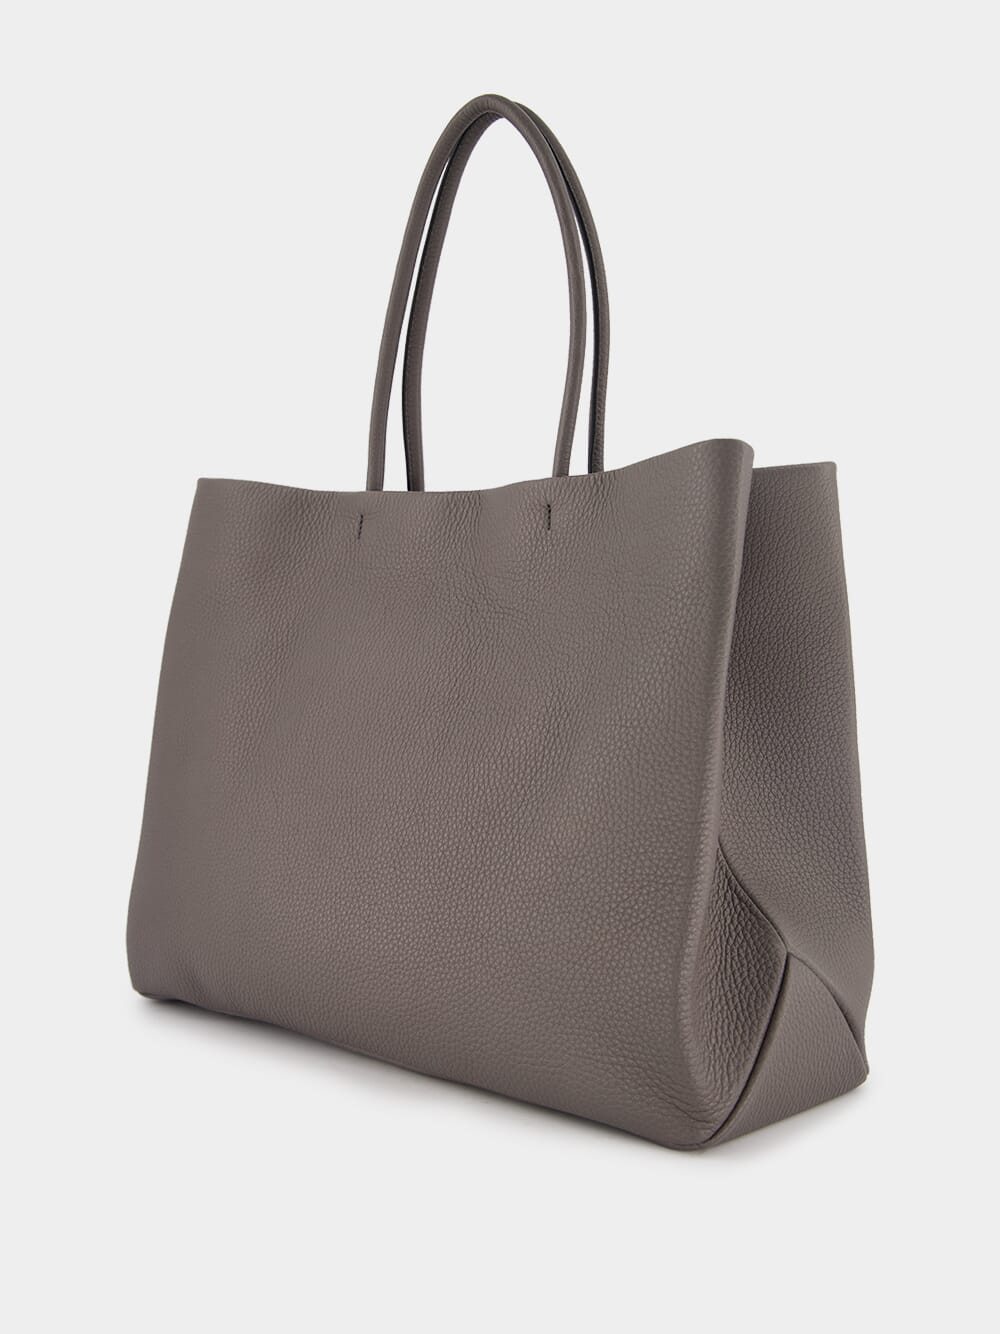 Tom FordGrain Leather Large Tote Bag at Fashion Clinic